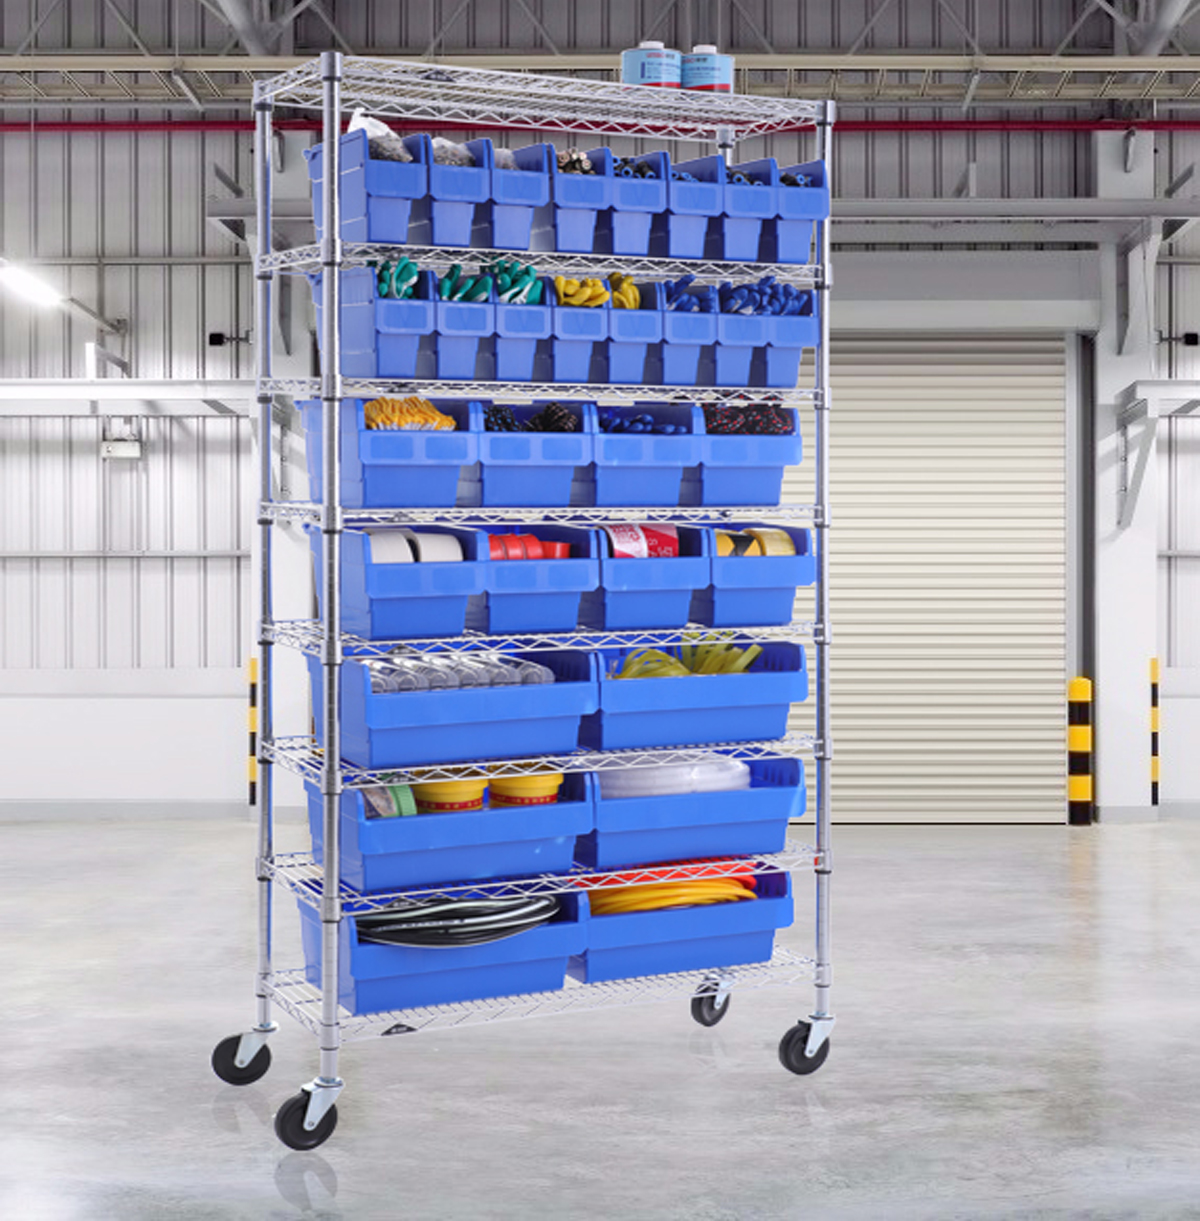 8-tier Wire Shelving Unit with Wheels / Wire Storage Rack on Wheels / Adjustable Metal Shelving